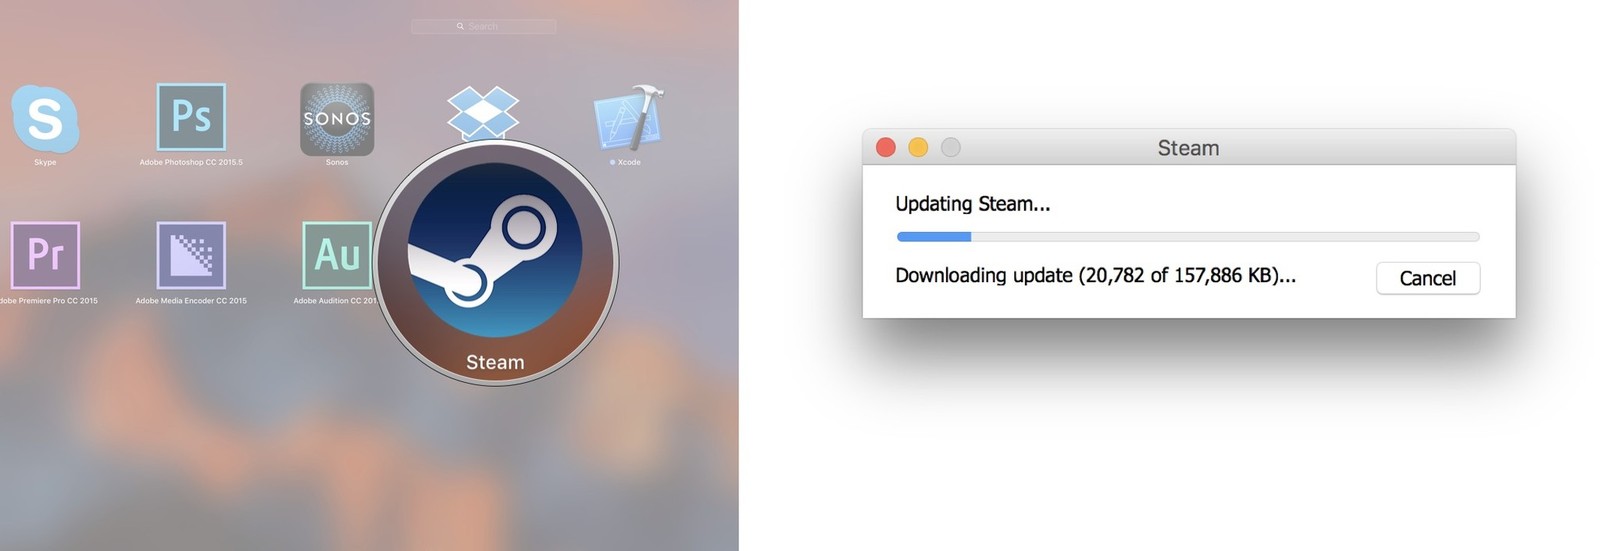 Download steam for mac os x 10.5.8